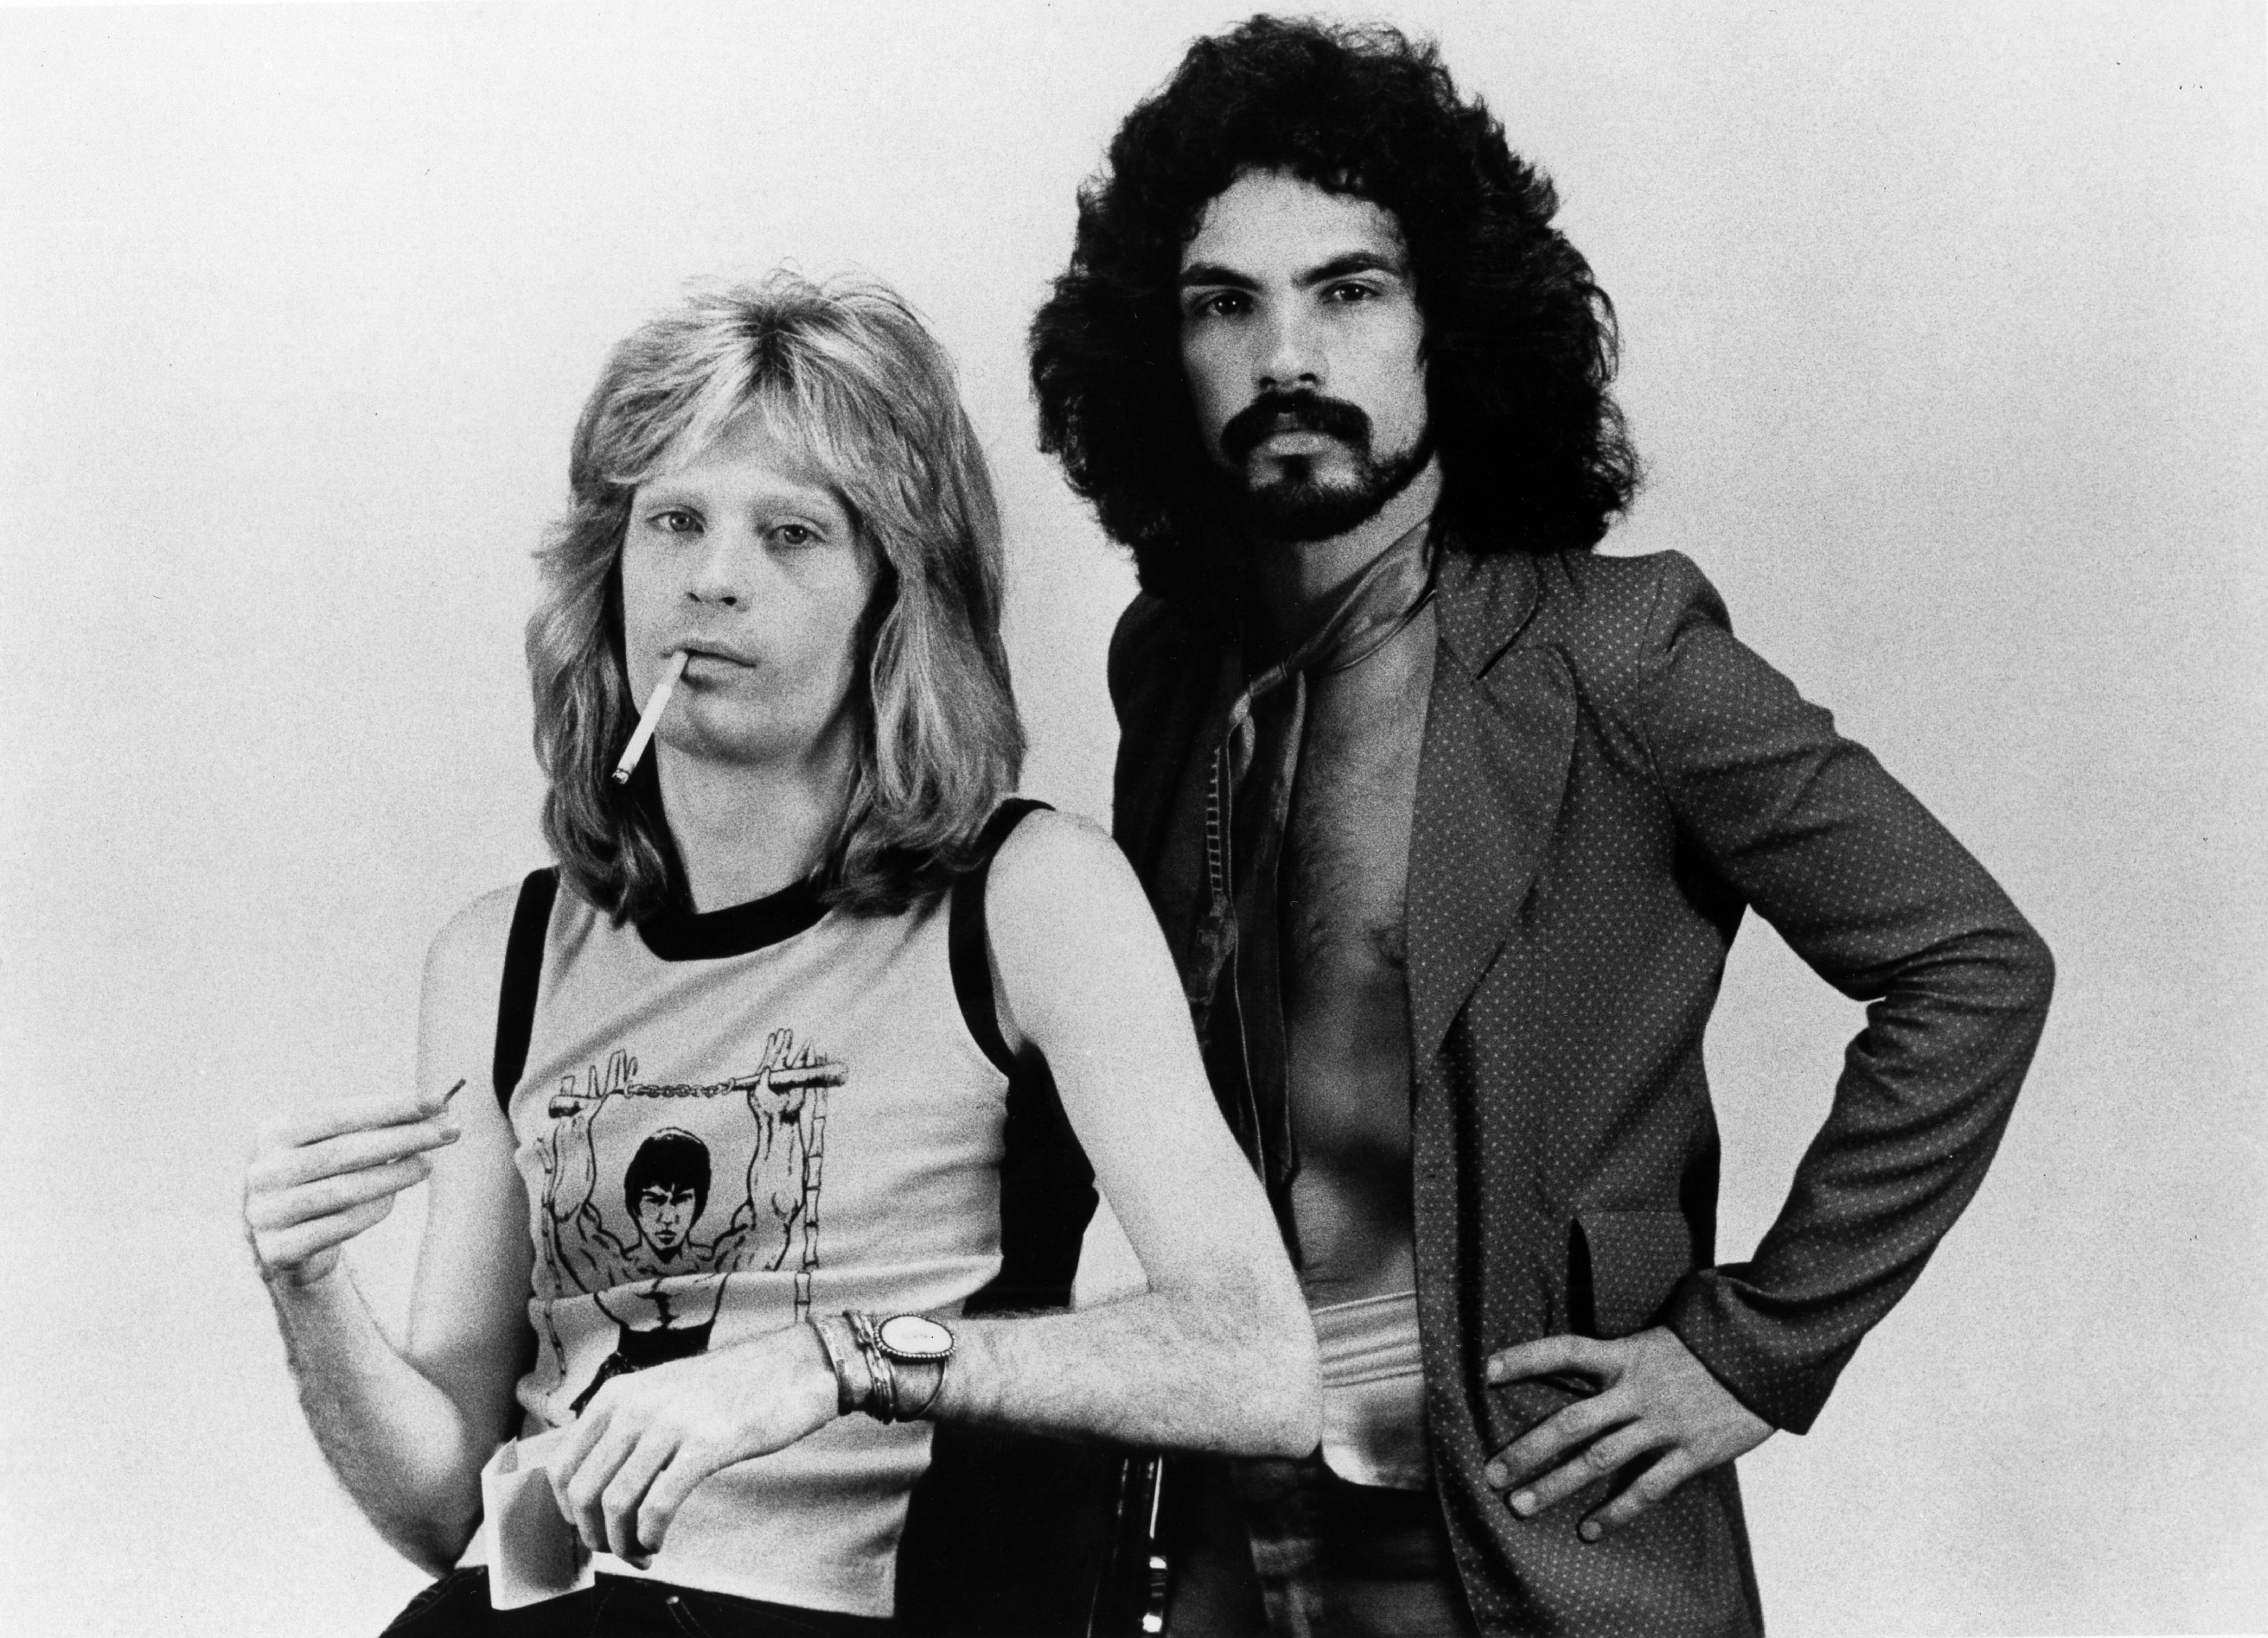 Daryl and John Oates  formed the pop/rock duo in the 1970s